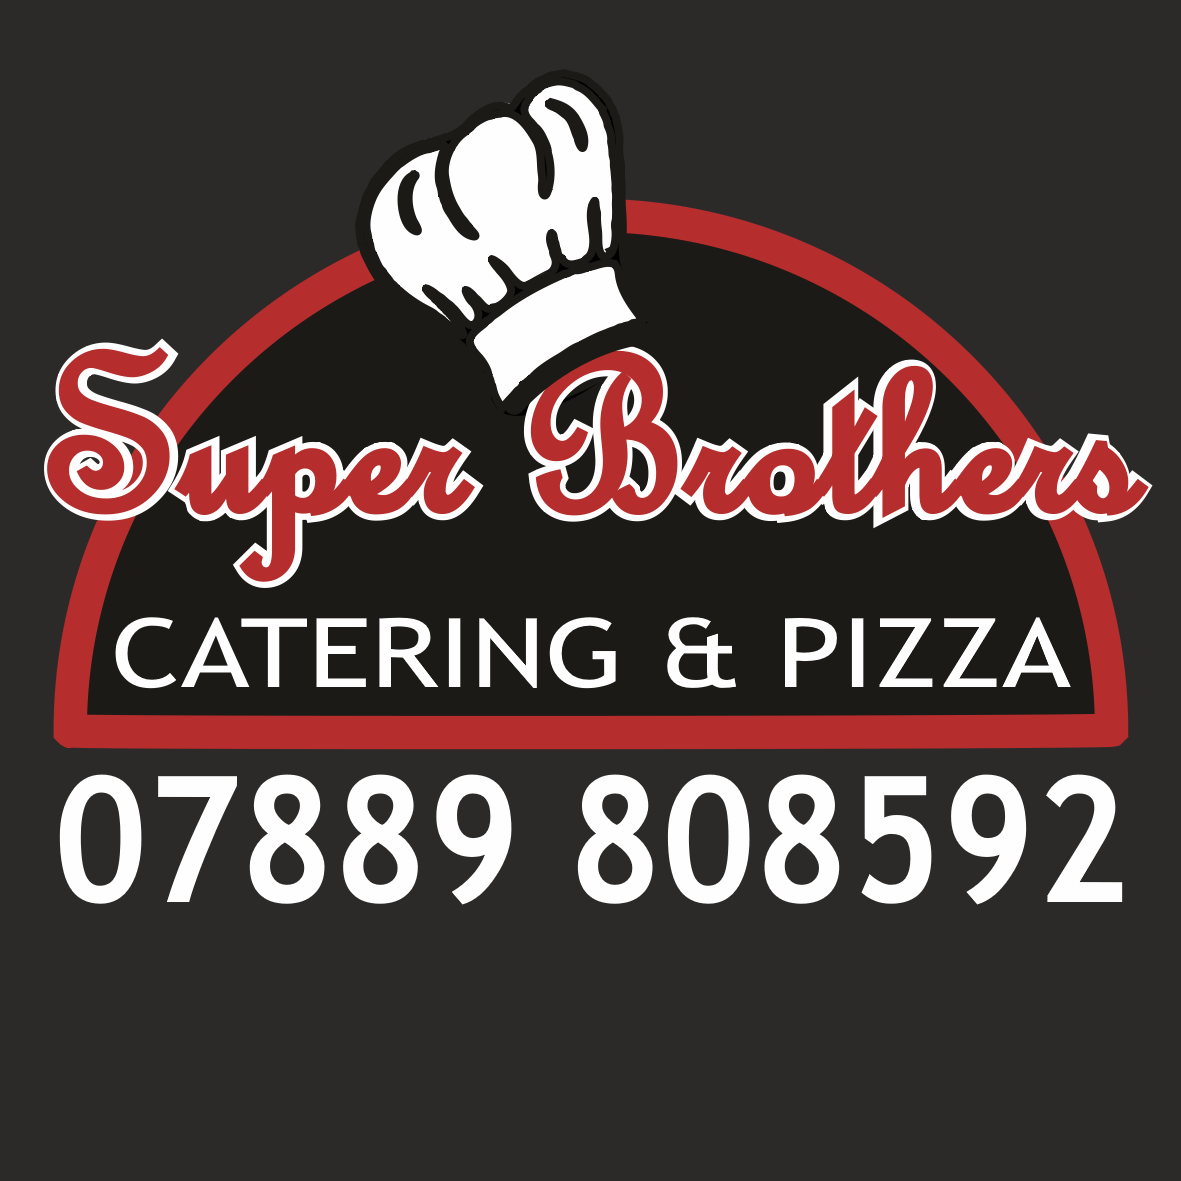 The Super Brothers Catering